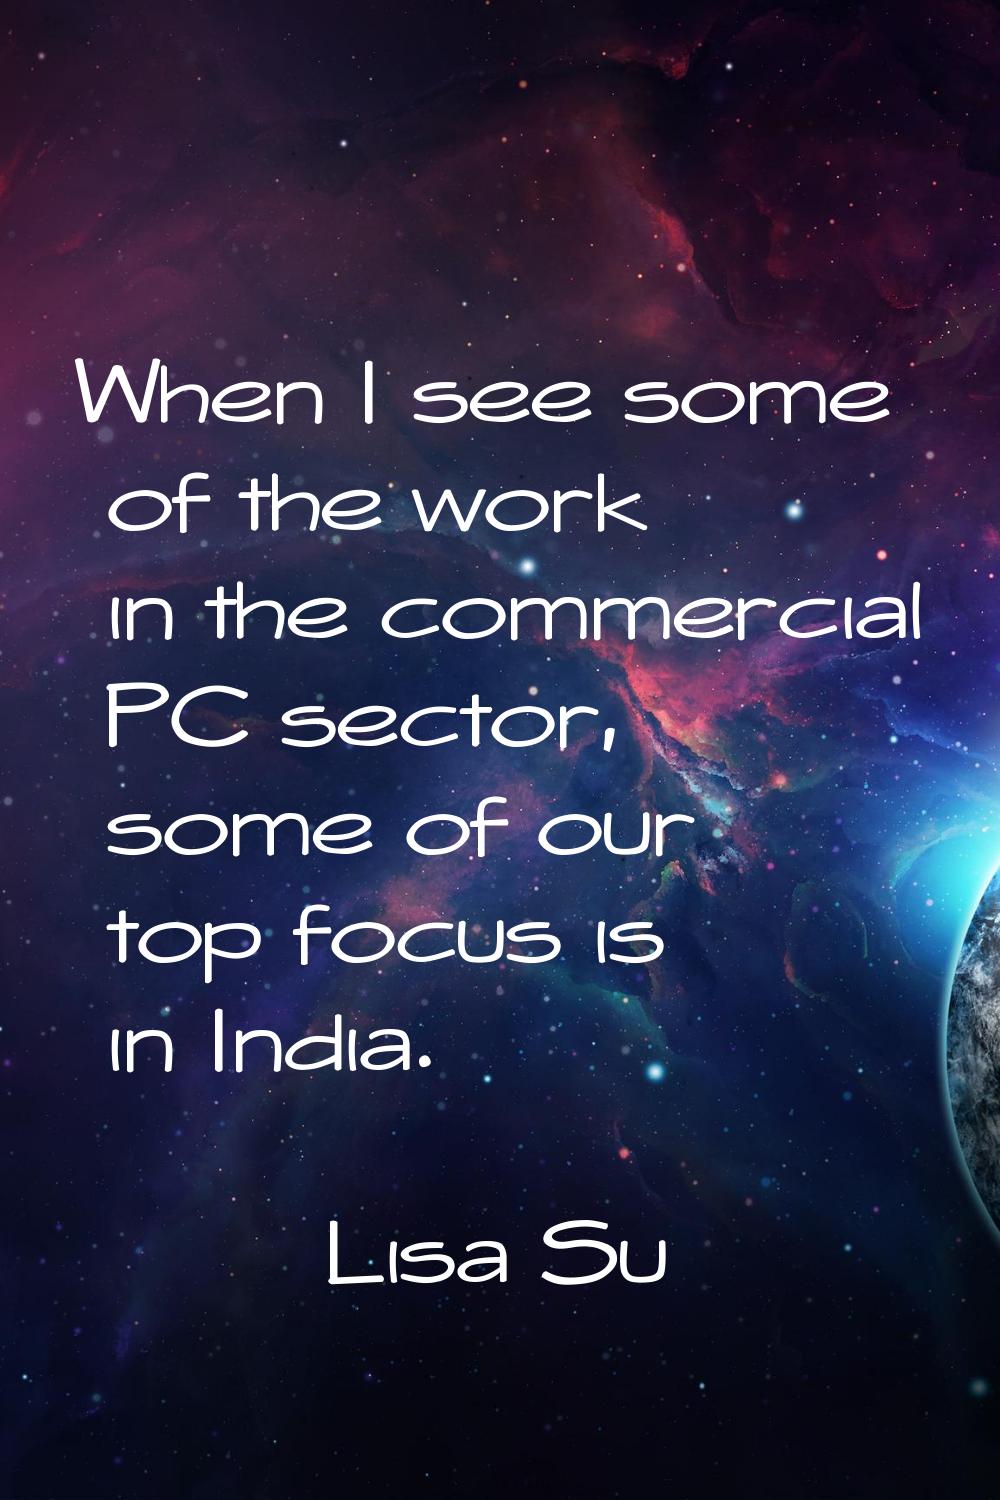 When I see some of the work in the commercial PC sector, some of our top focus is in India.